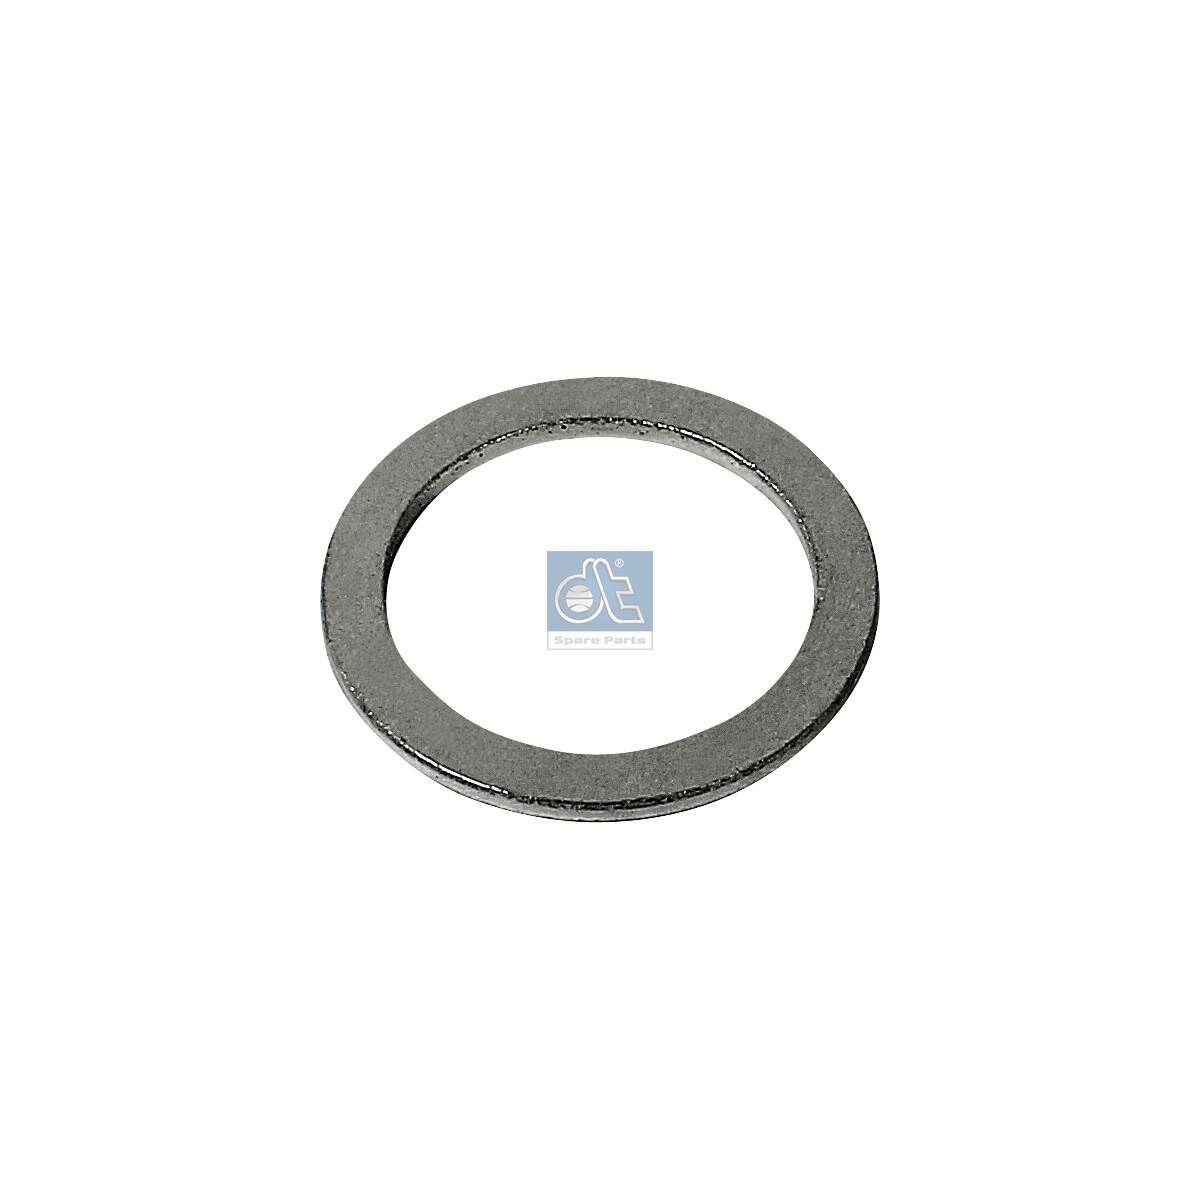 Original 9.01501 DT Spare Parts Oil drain plug gasket experience and price